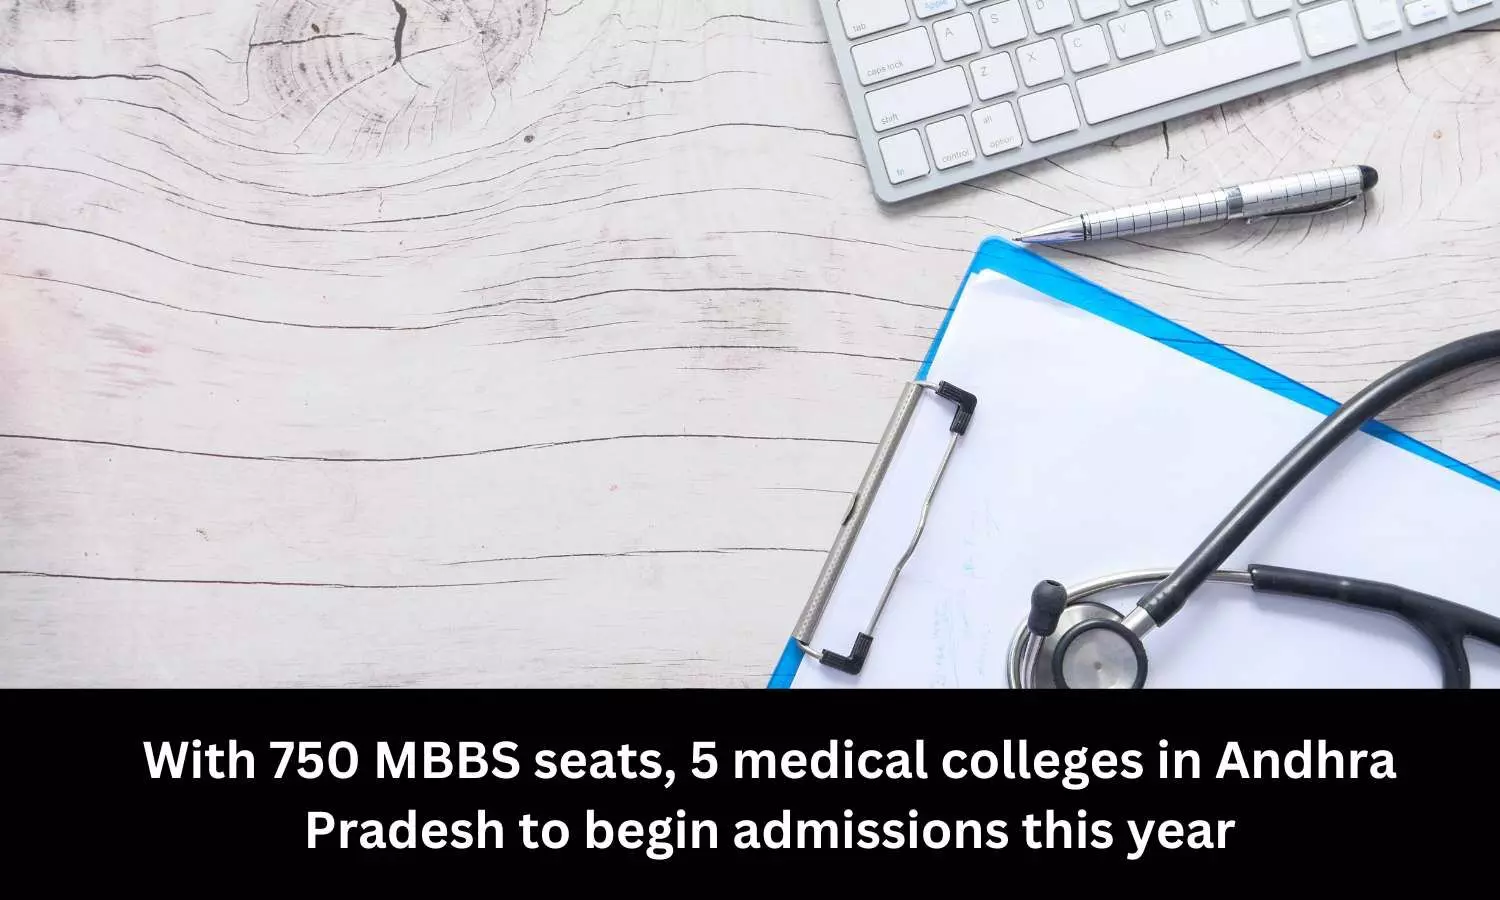 Andhra Pradesh: 5 medical colleges with 750 MBBS seats to start admissions this year